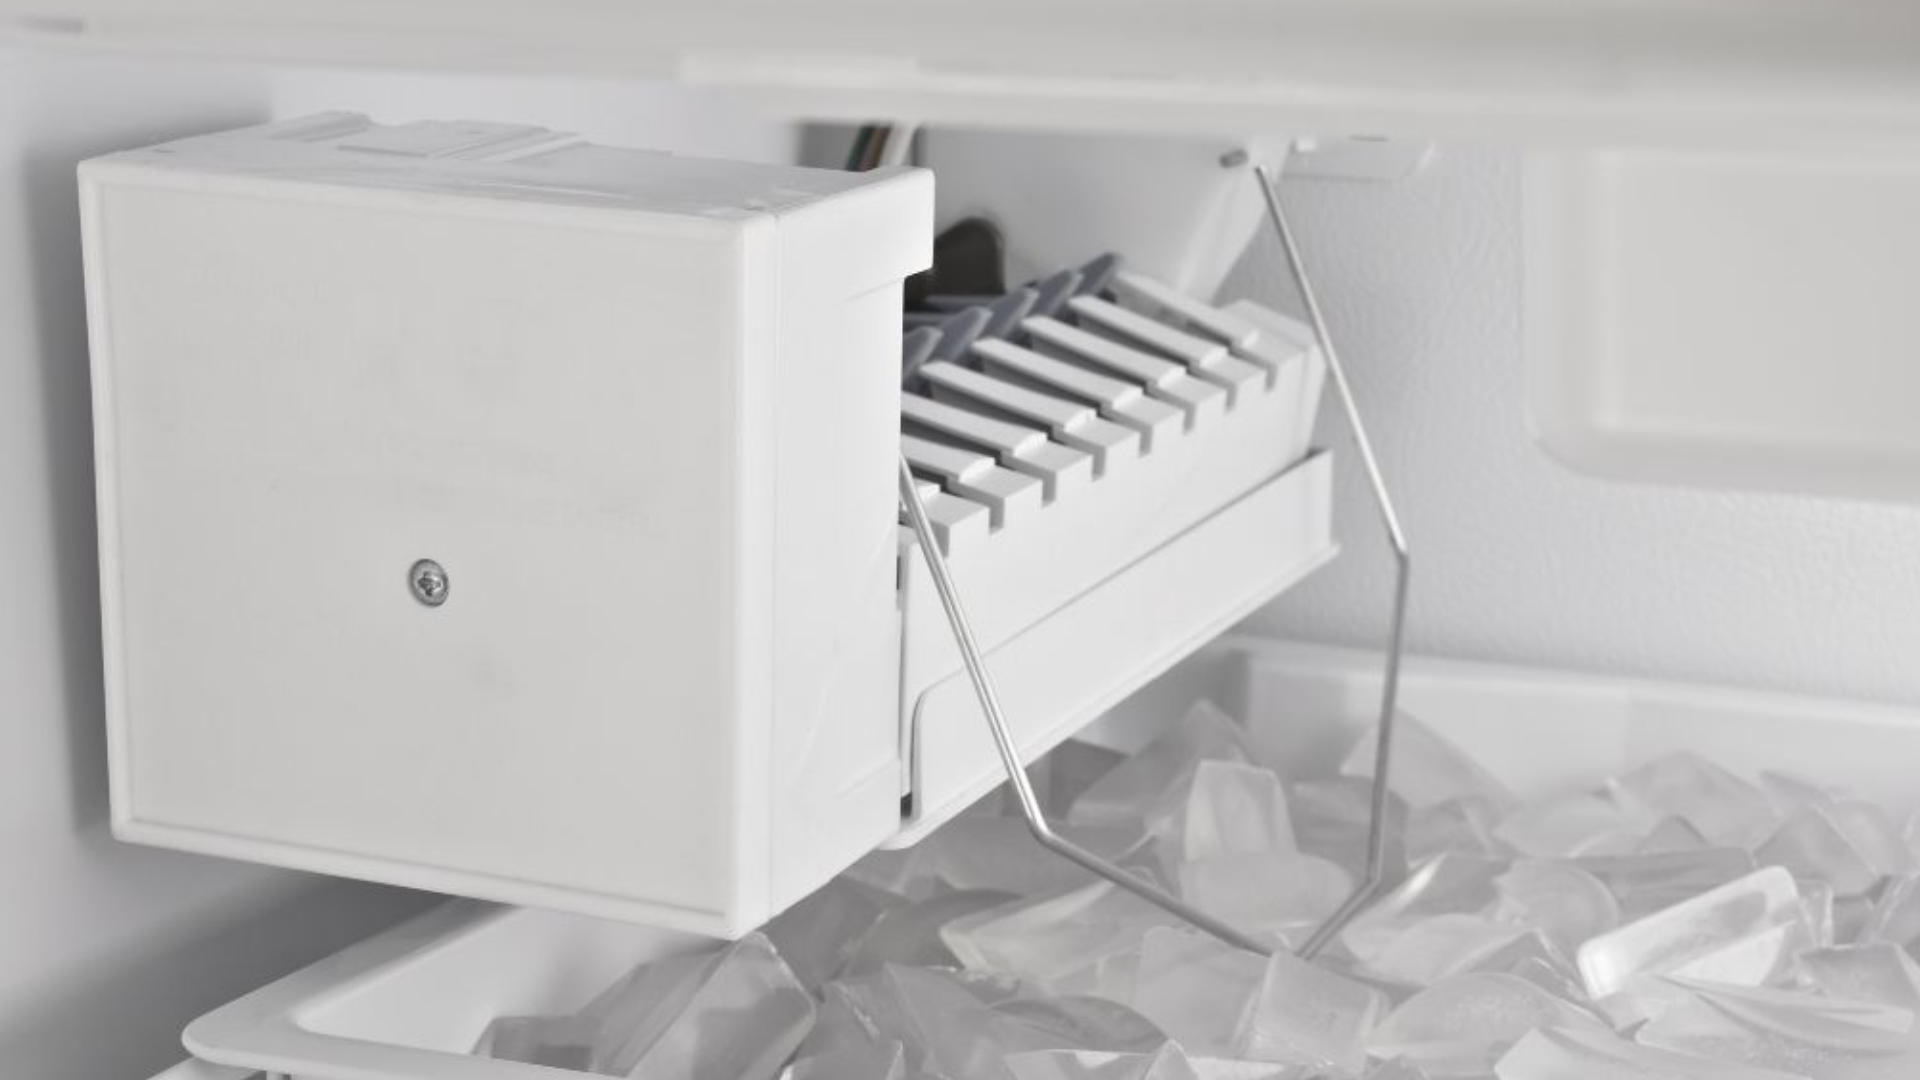 How to Clean Your Ice Maker - Dan Marc Appliance  How to Clean a Frigidaire Ice Maker in 30 Seconds or Less icemaker